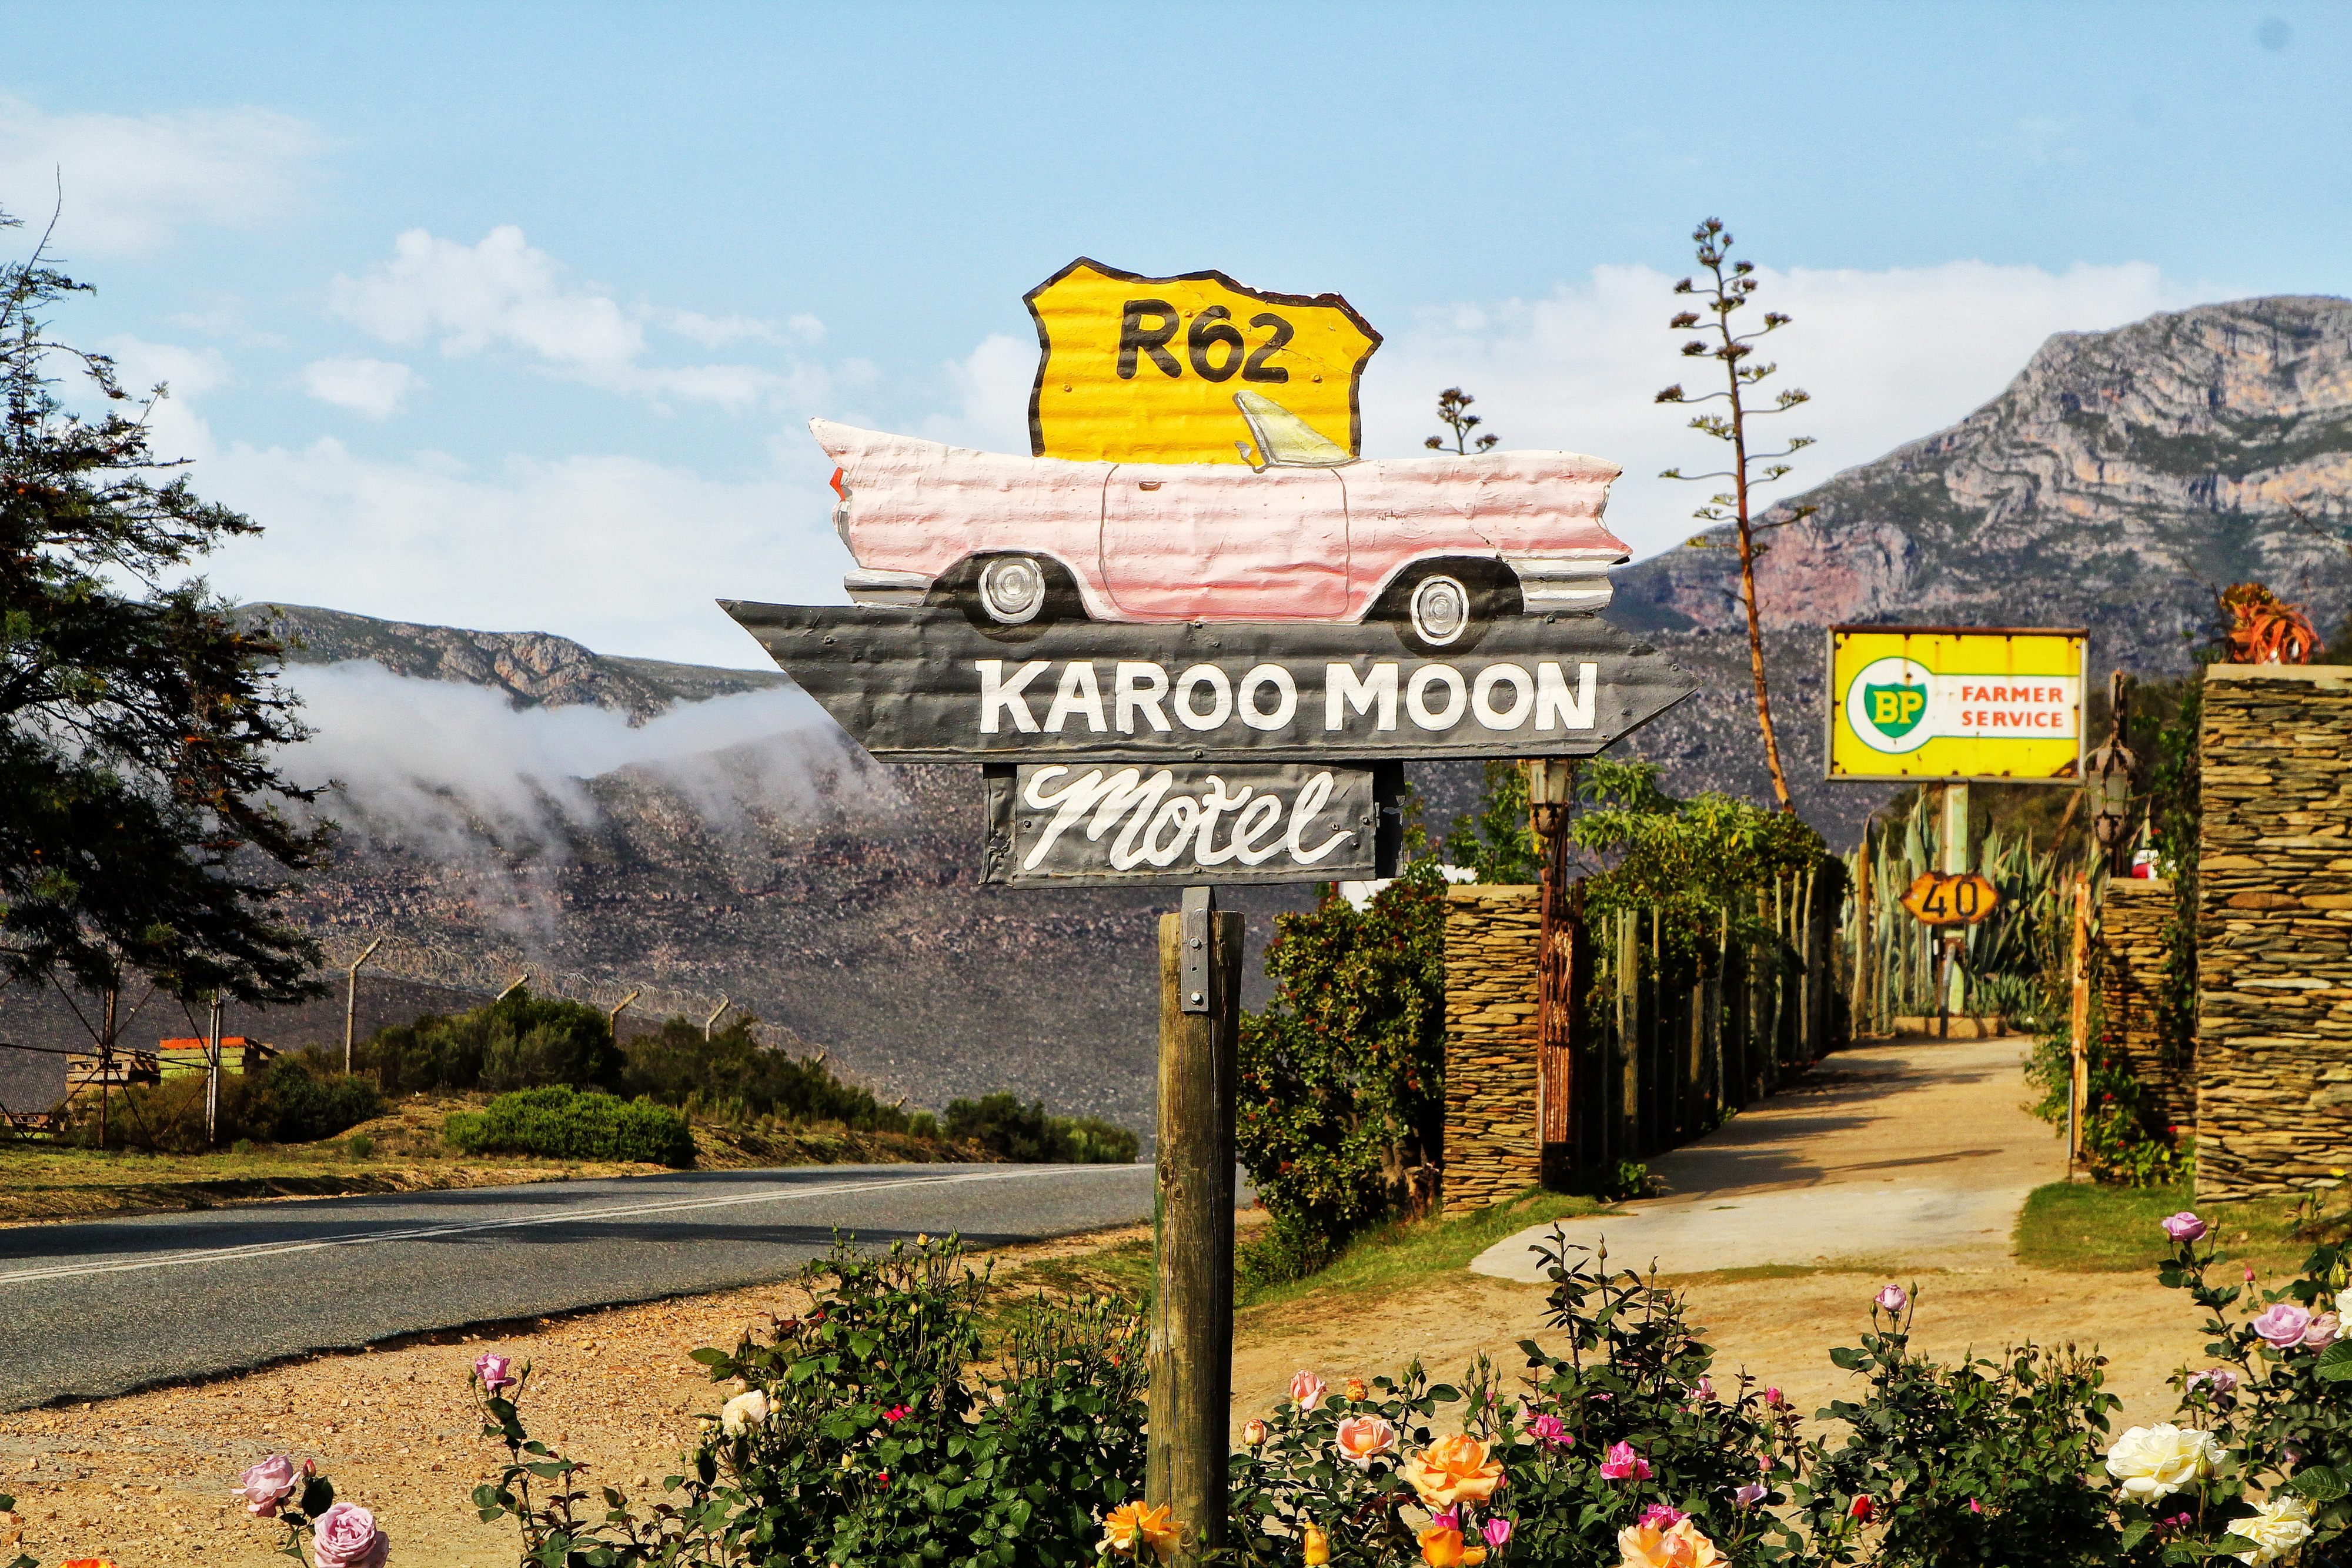 bandits, big birds and a busted box in barrydale — a karoo space bakkie tale